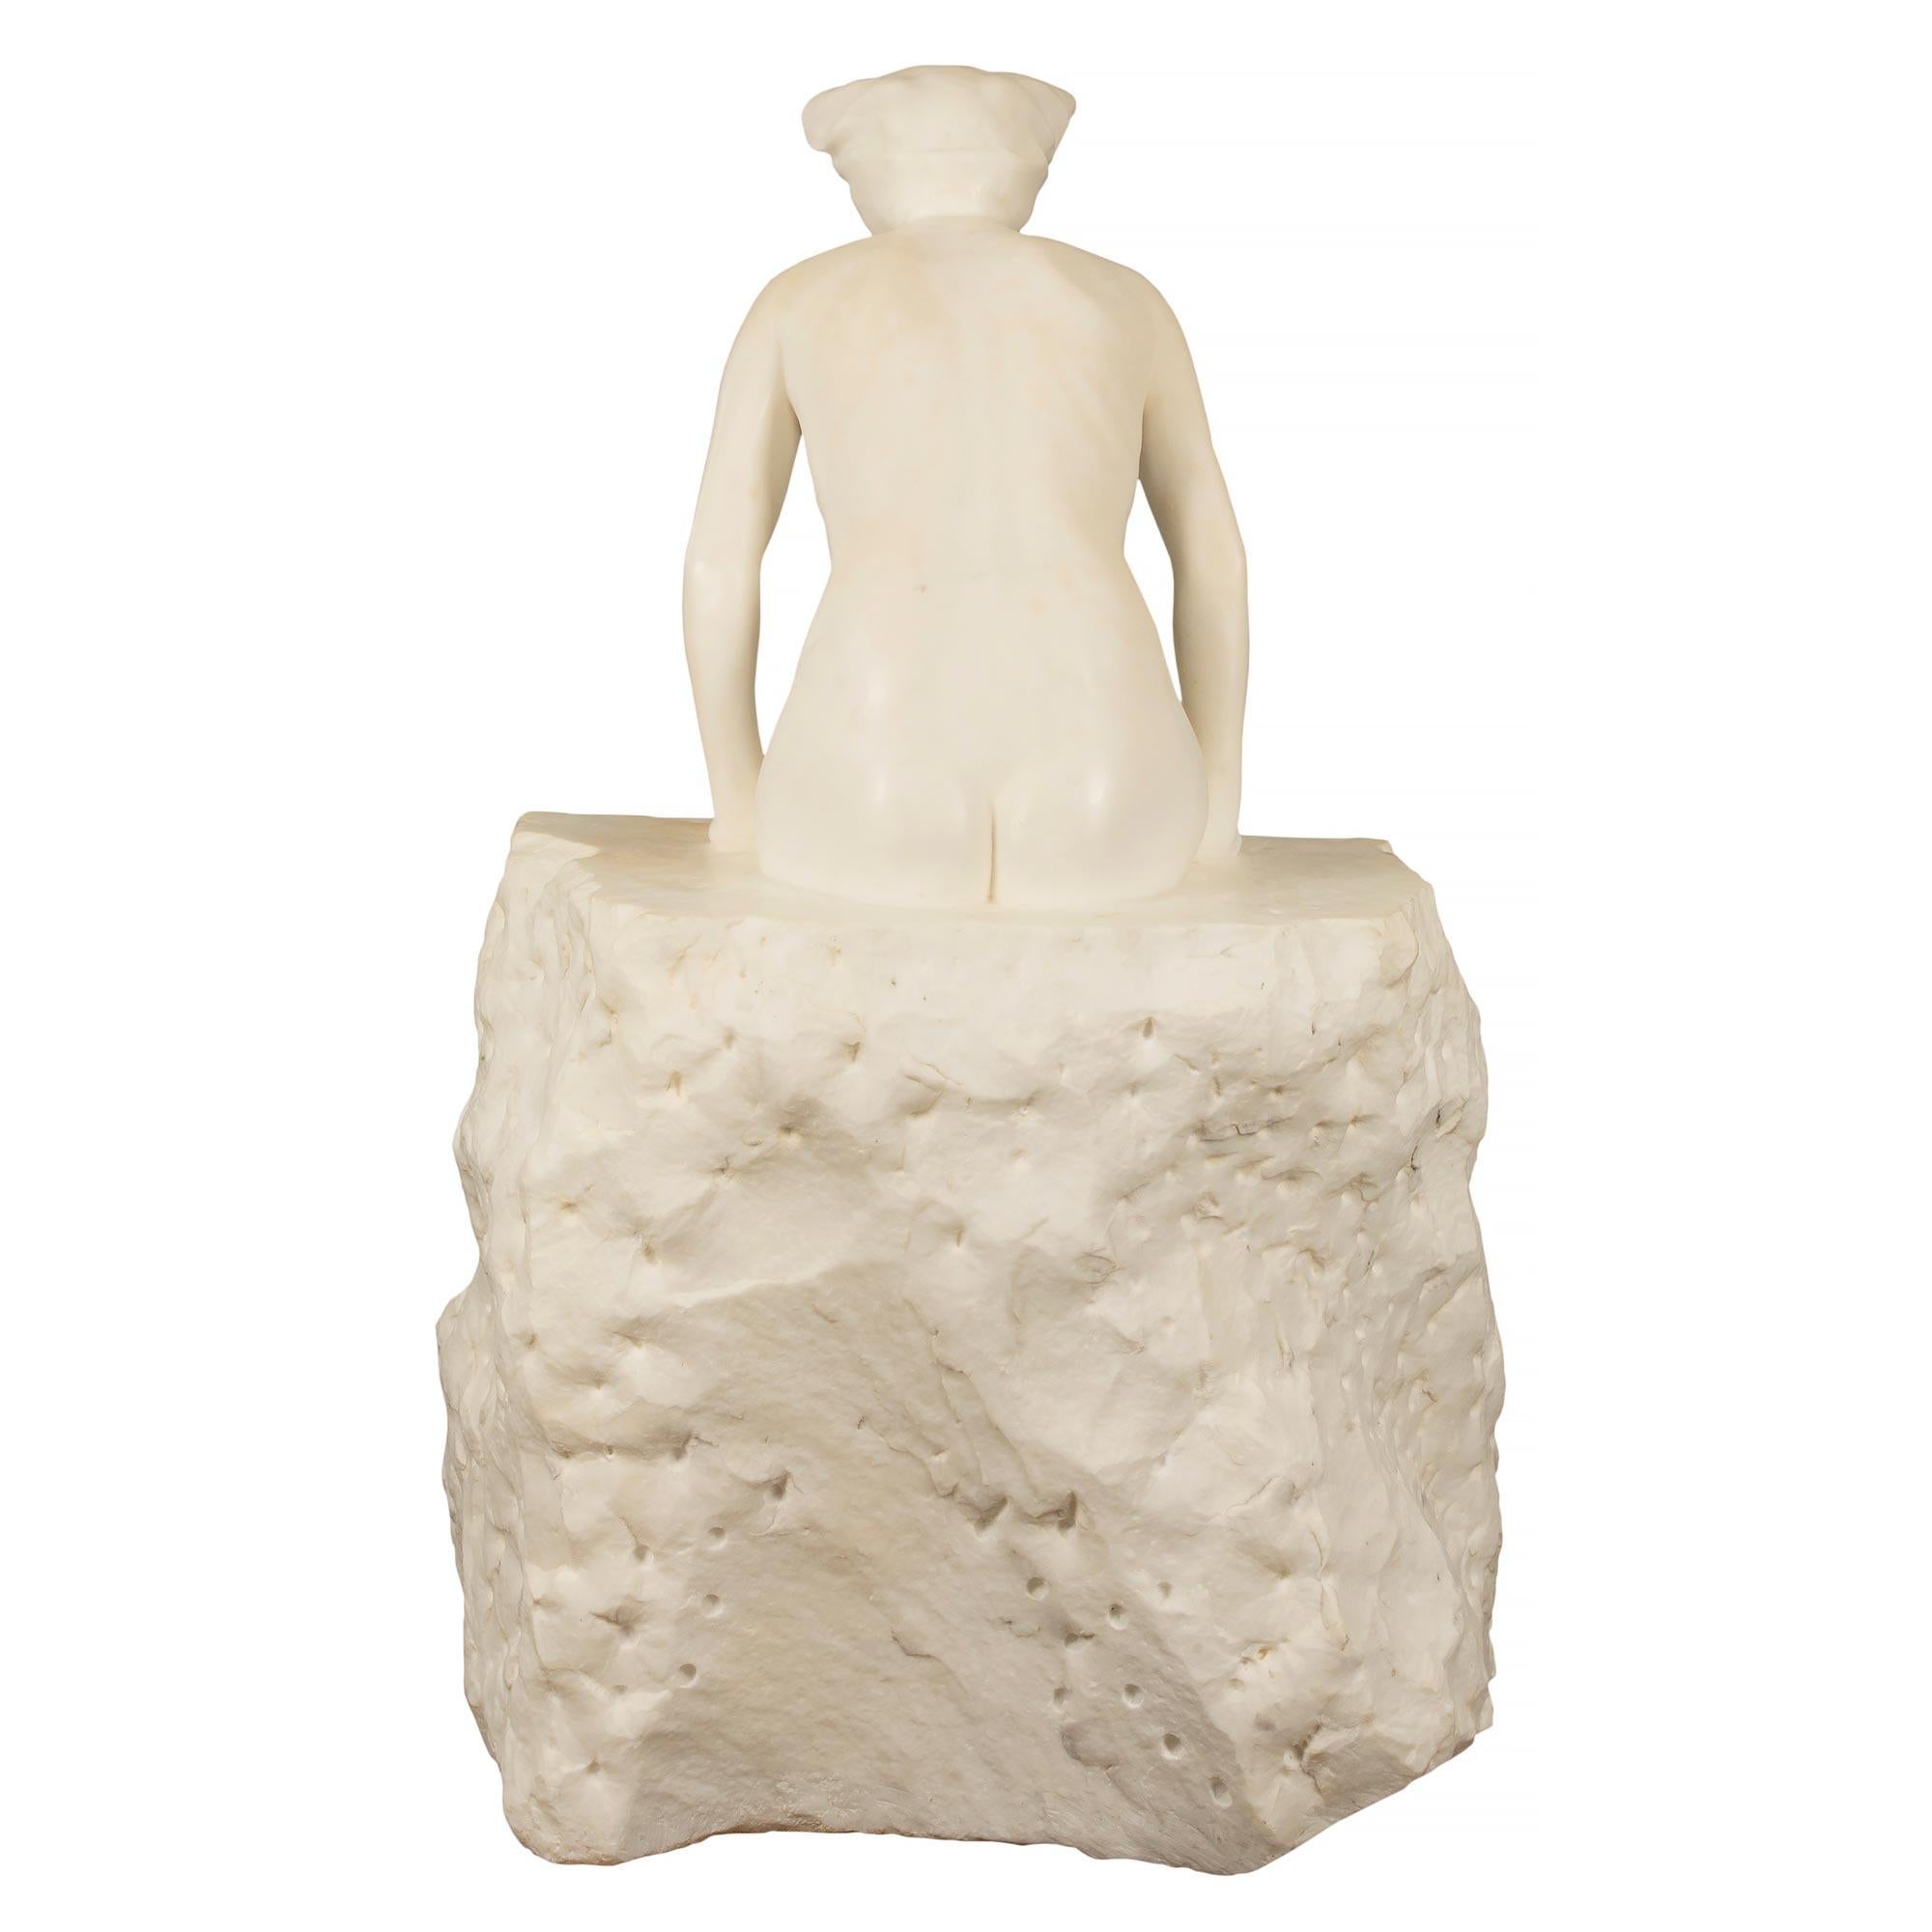 Italian 19th Century White Carrara Marble Statue of a Maiden Sitting on a Rock For Sale 1